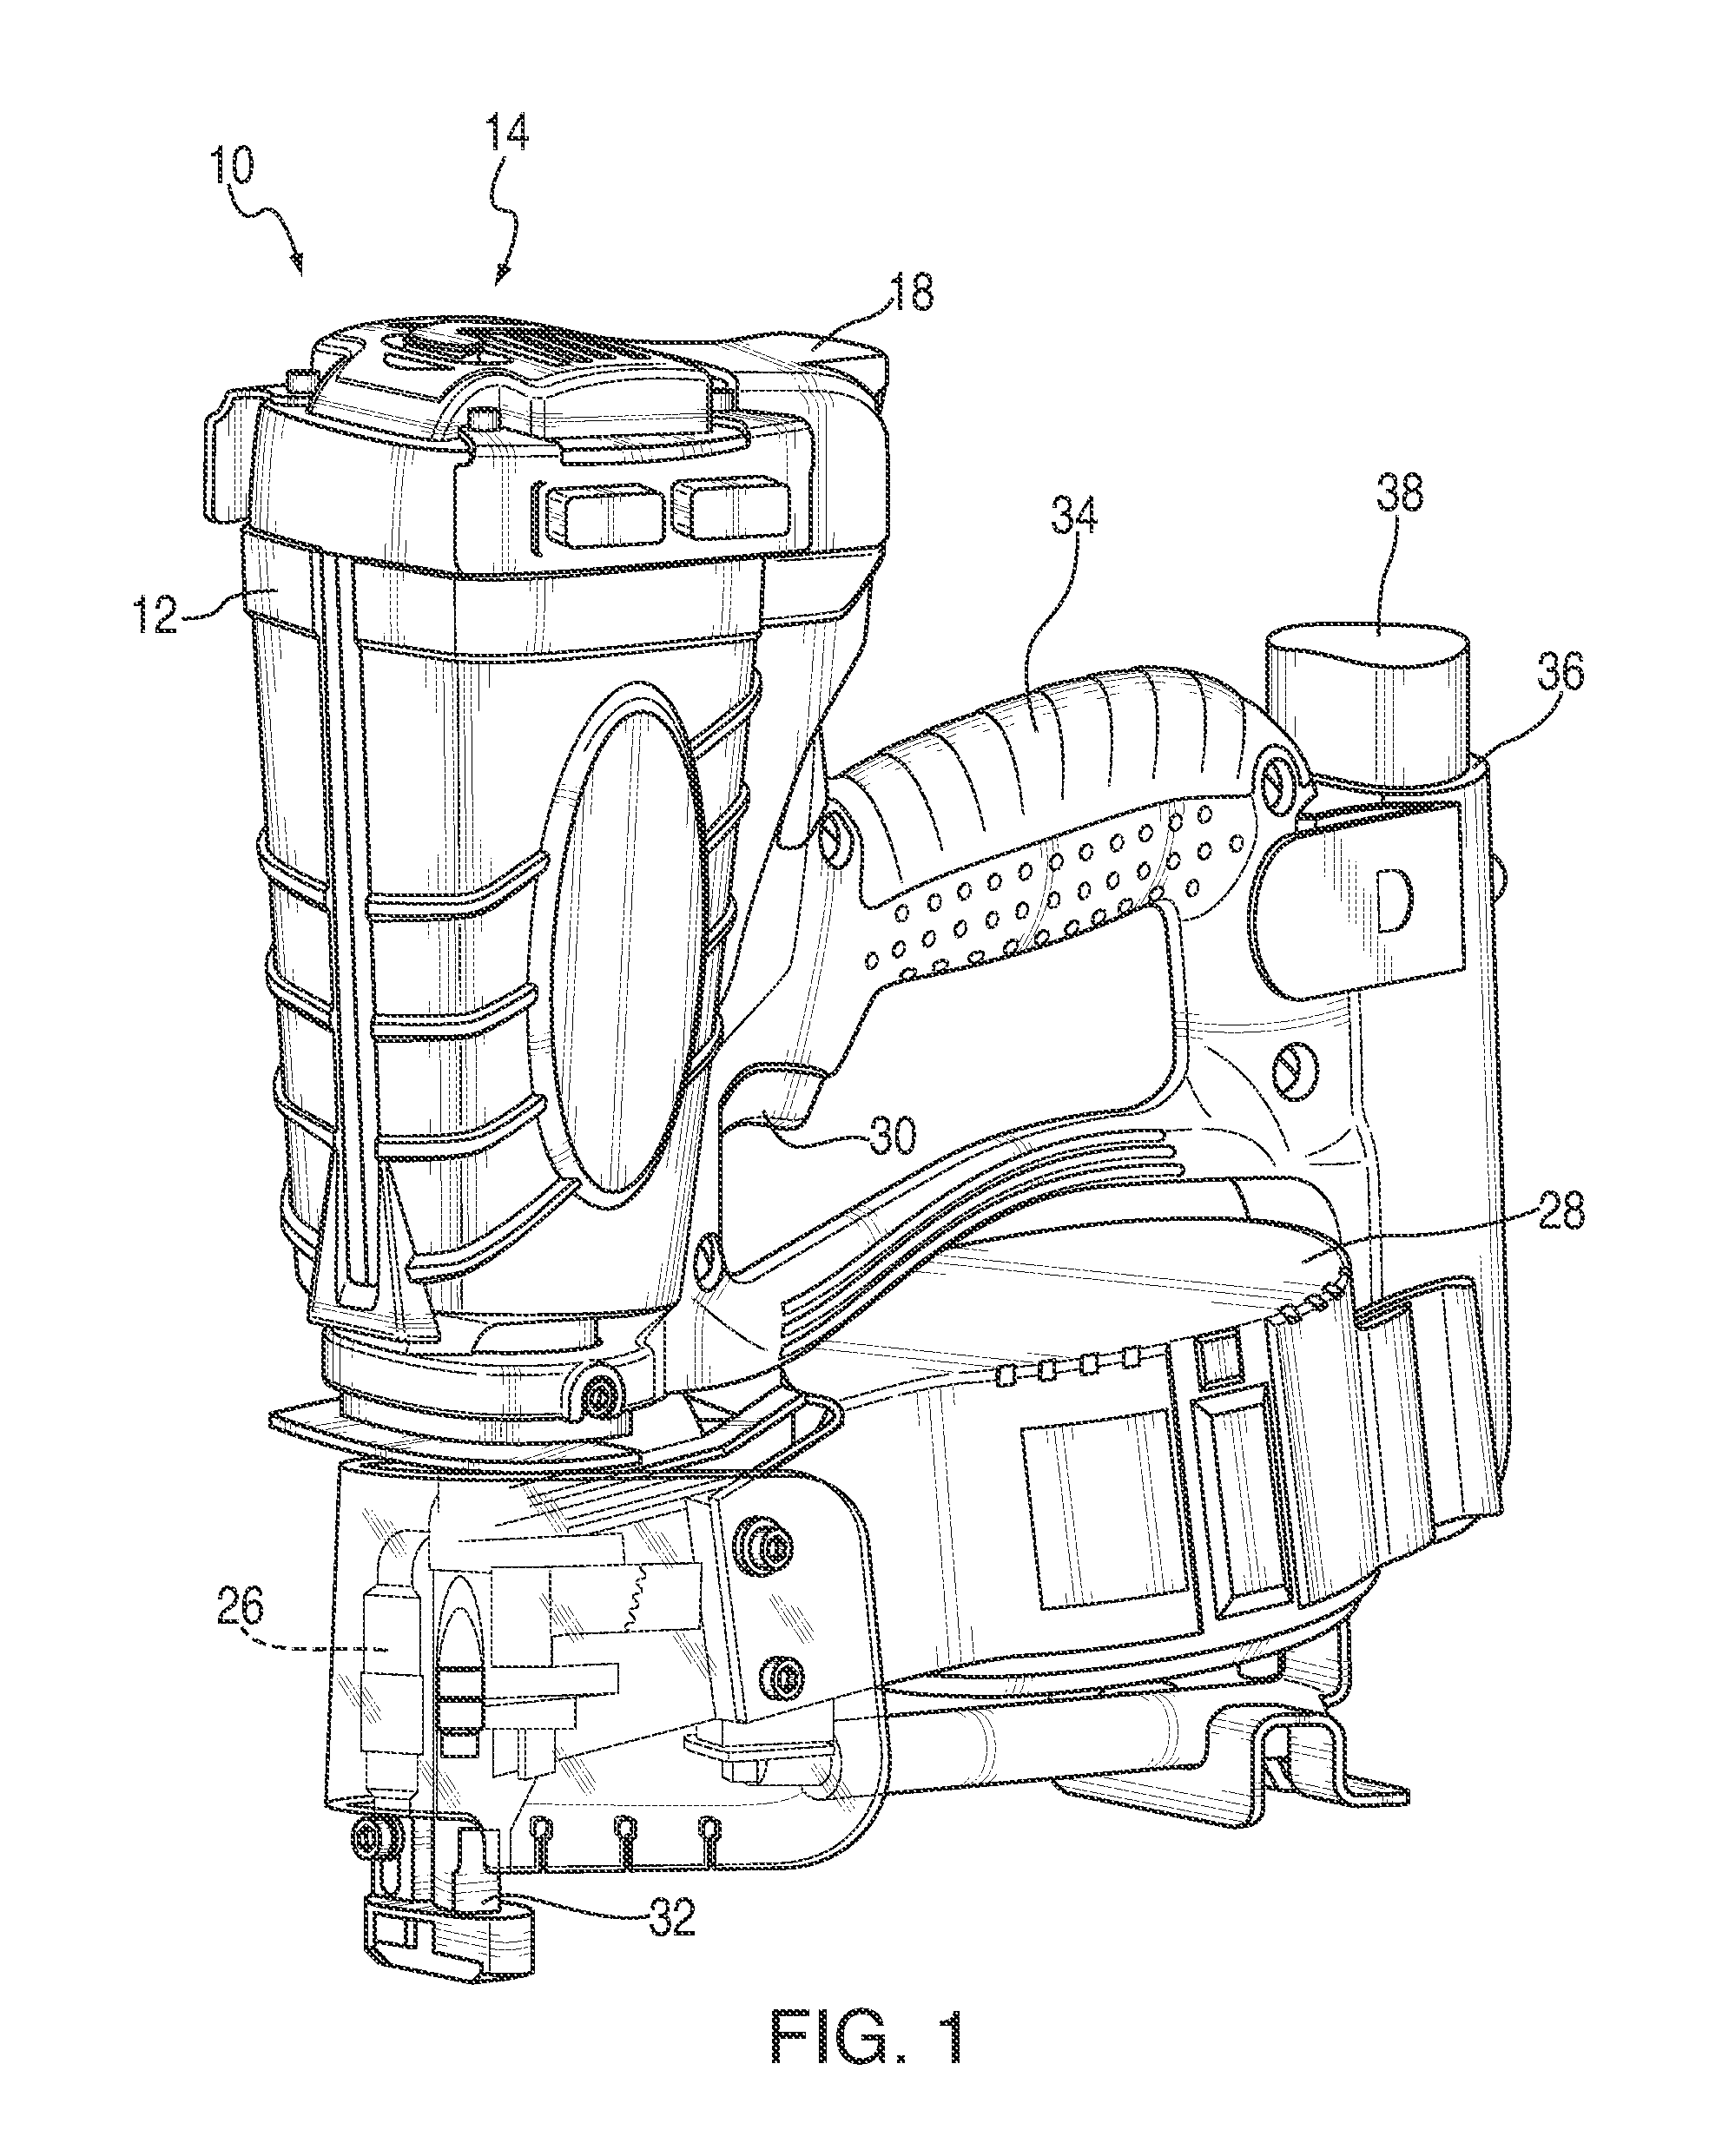 Interface for fuel delivery system for combustion nailer